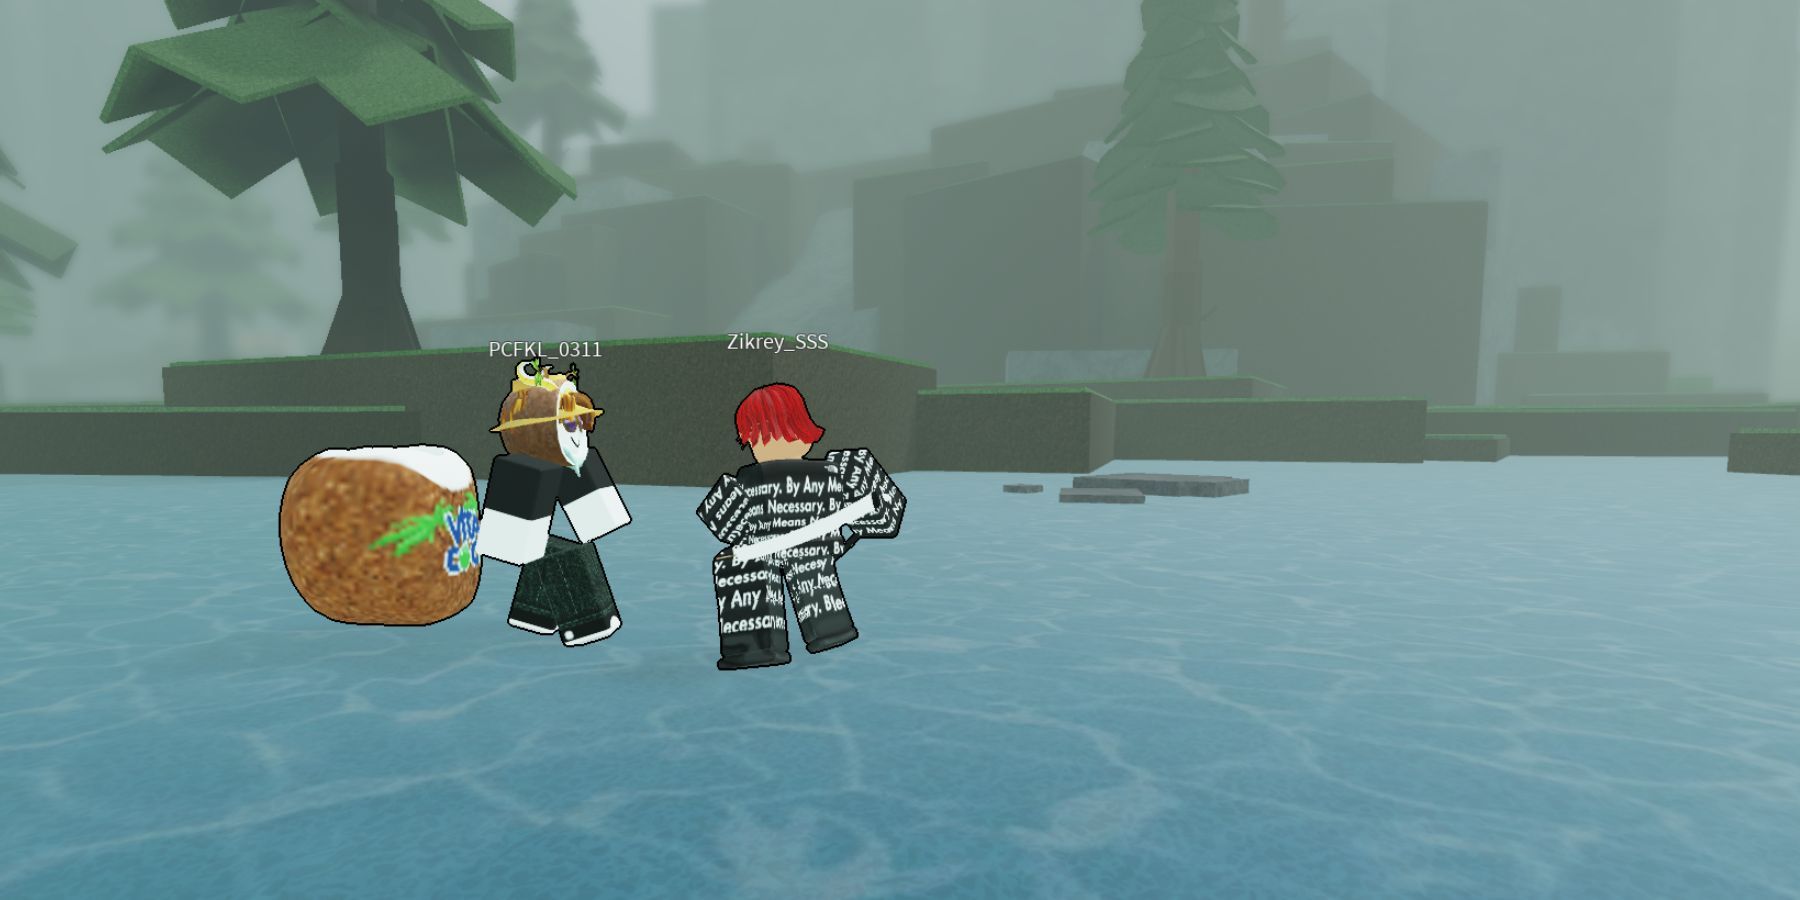 Sun Breathing 1 Shot Combo Rogue Demon #robloxfyp #roguedemon